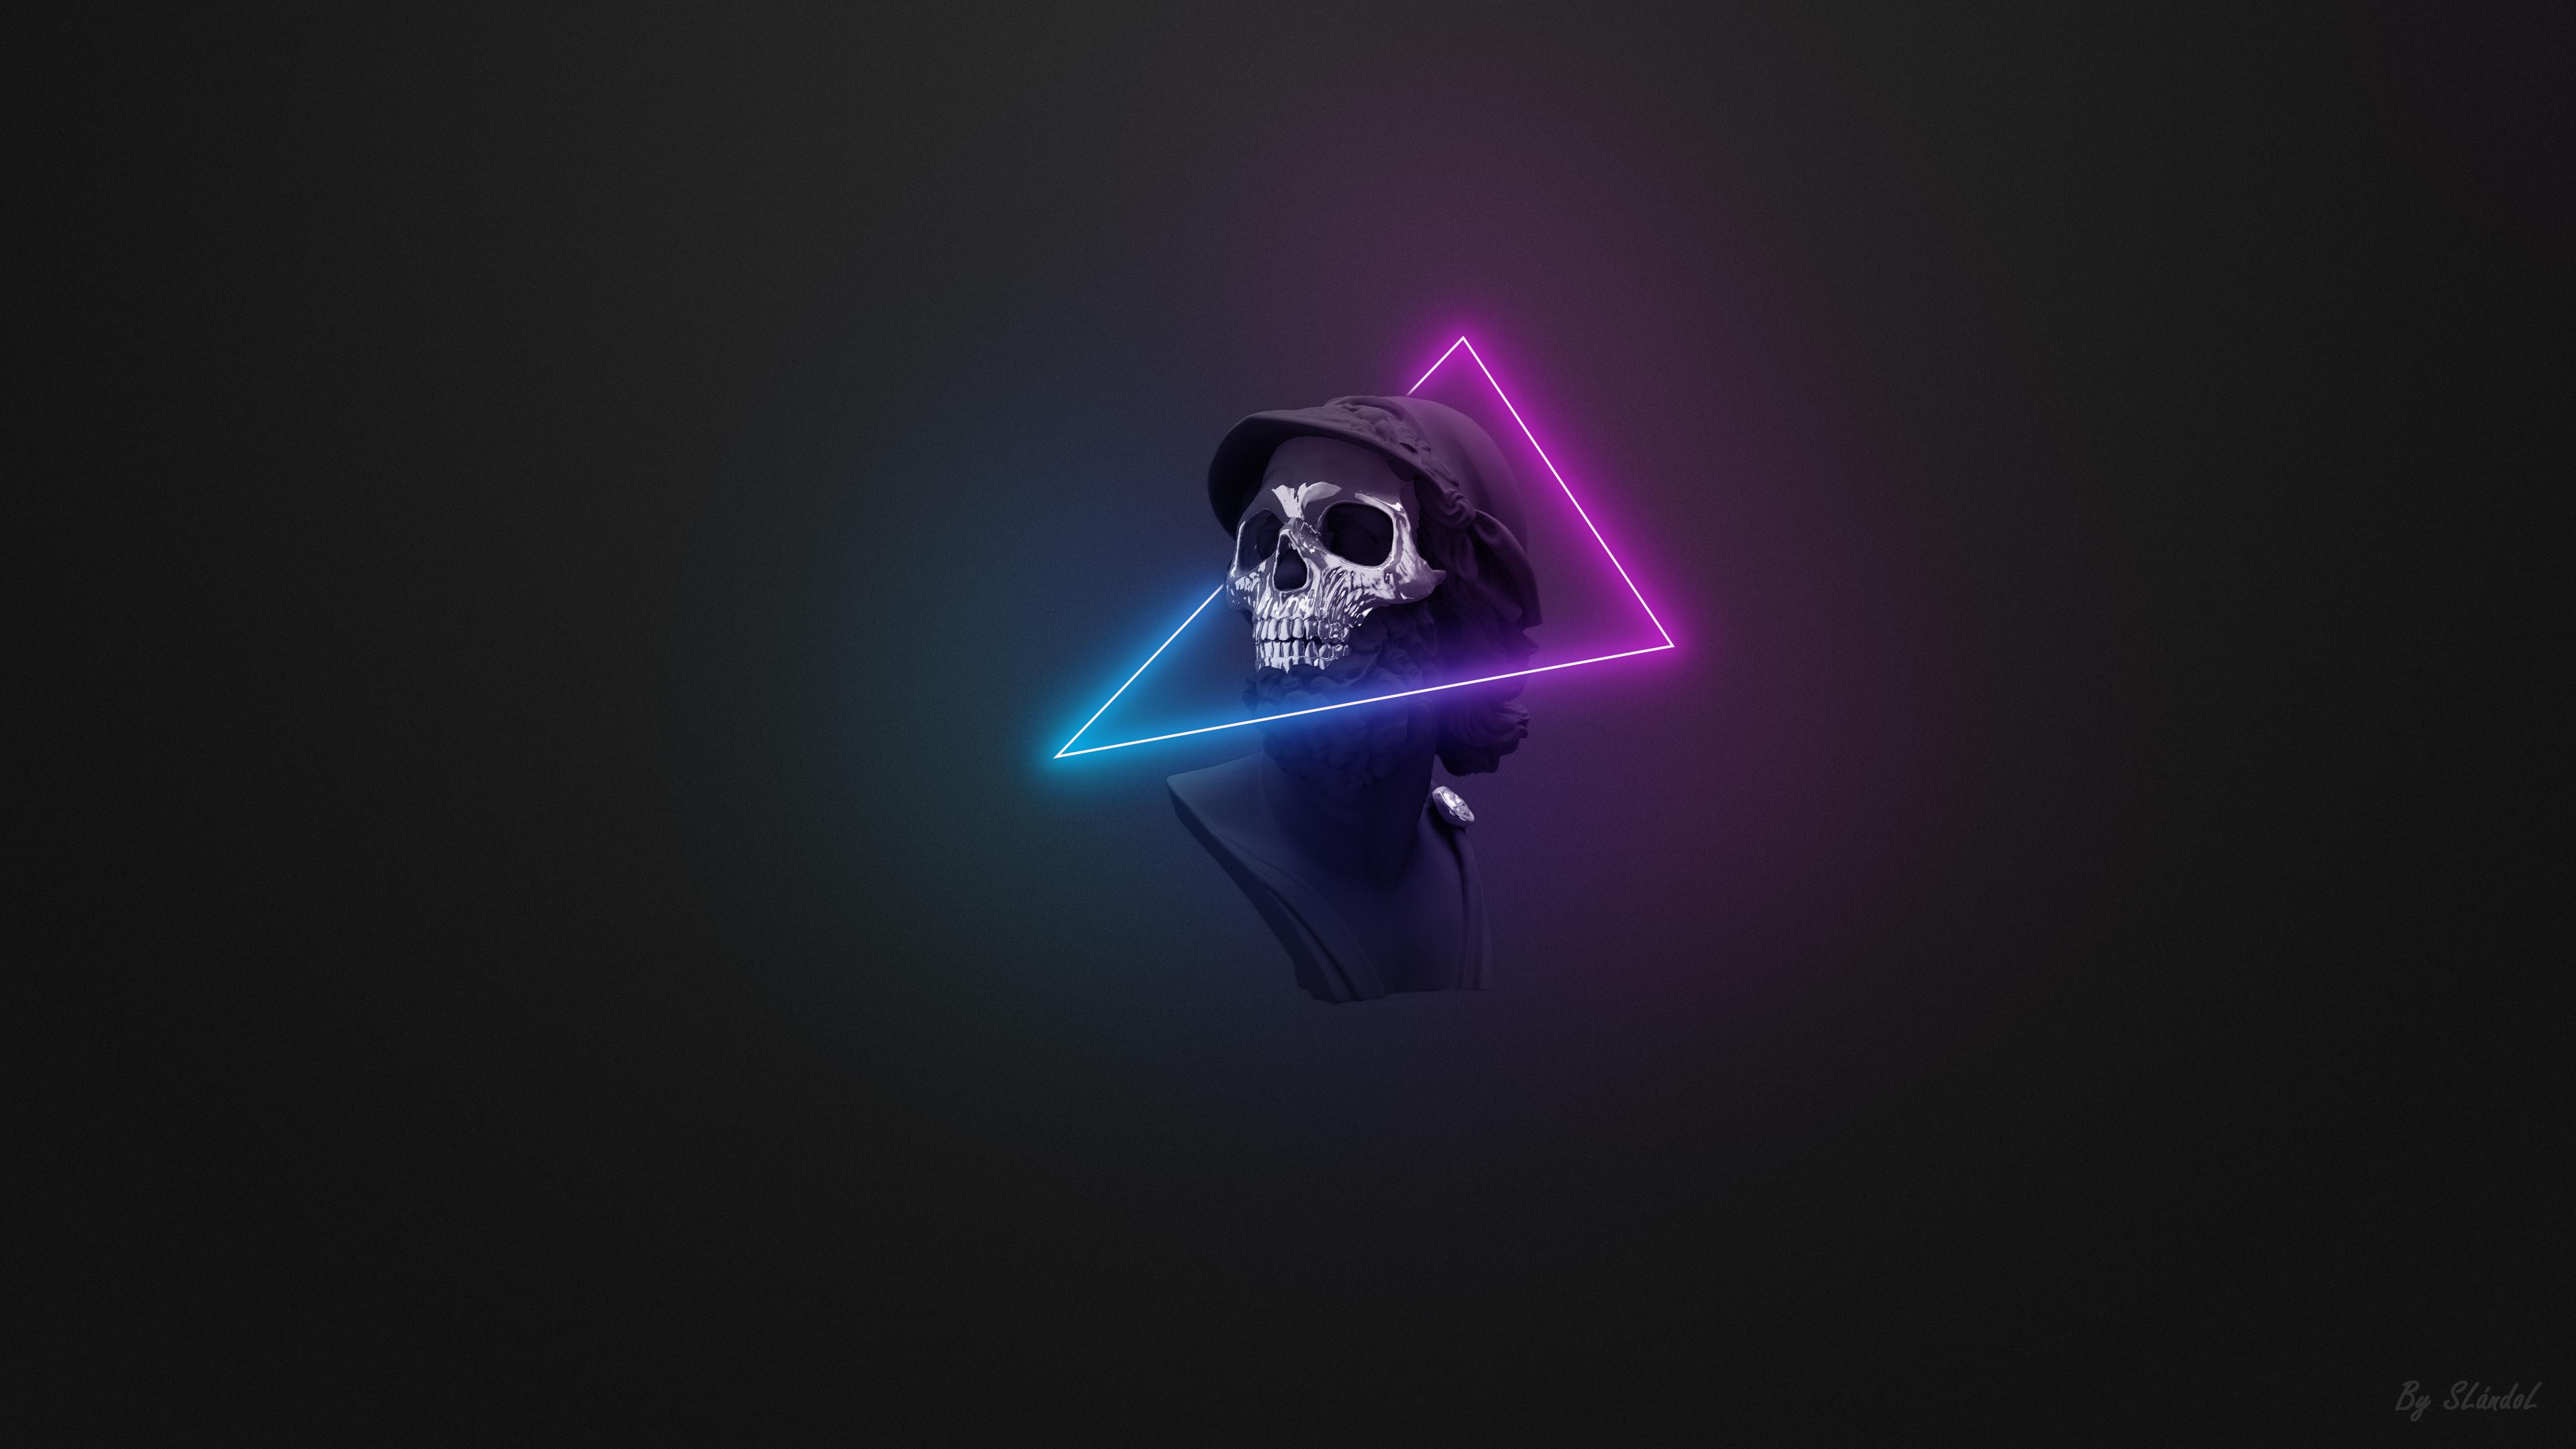 Mask 4K wallpaper for your desktop or mobile screen free and easy